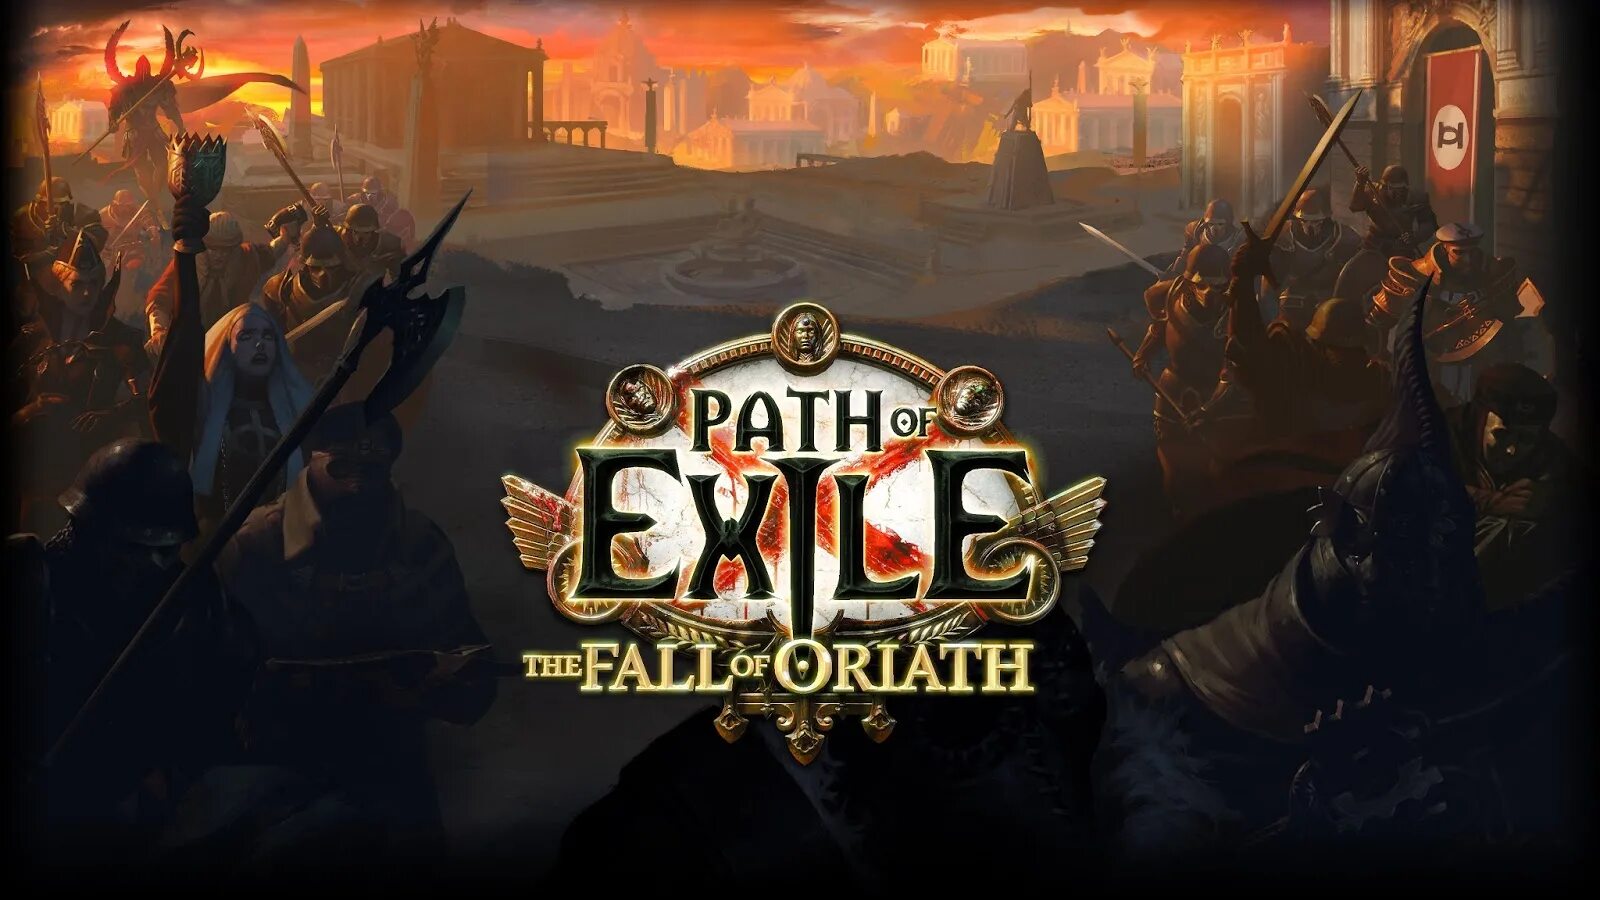 Poe steam. Path of Exile Oriath. Path of Exile Постер. Path of Exile 2015. POE заставка.